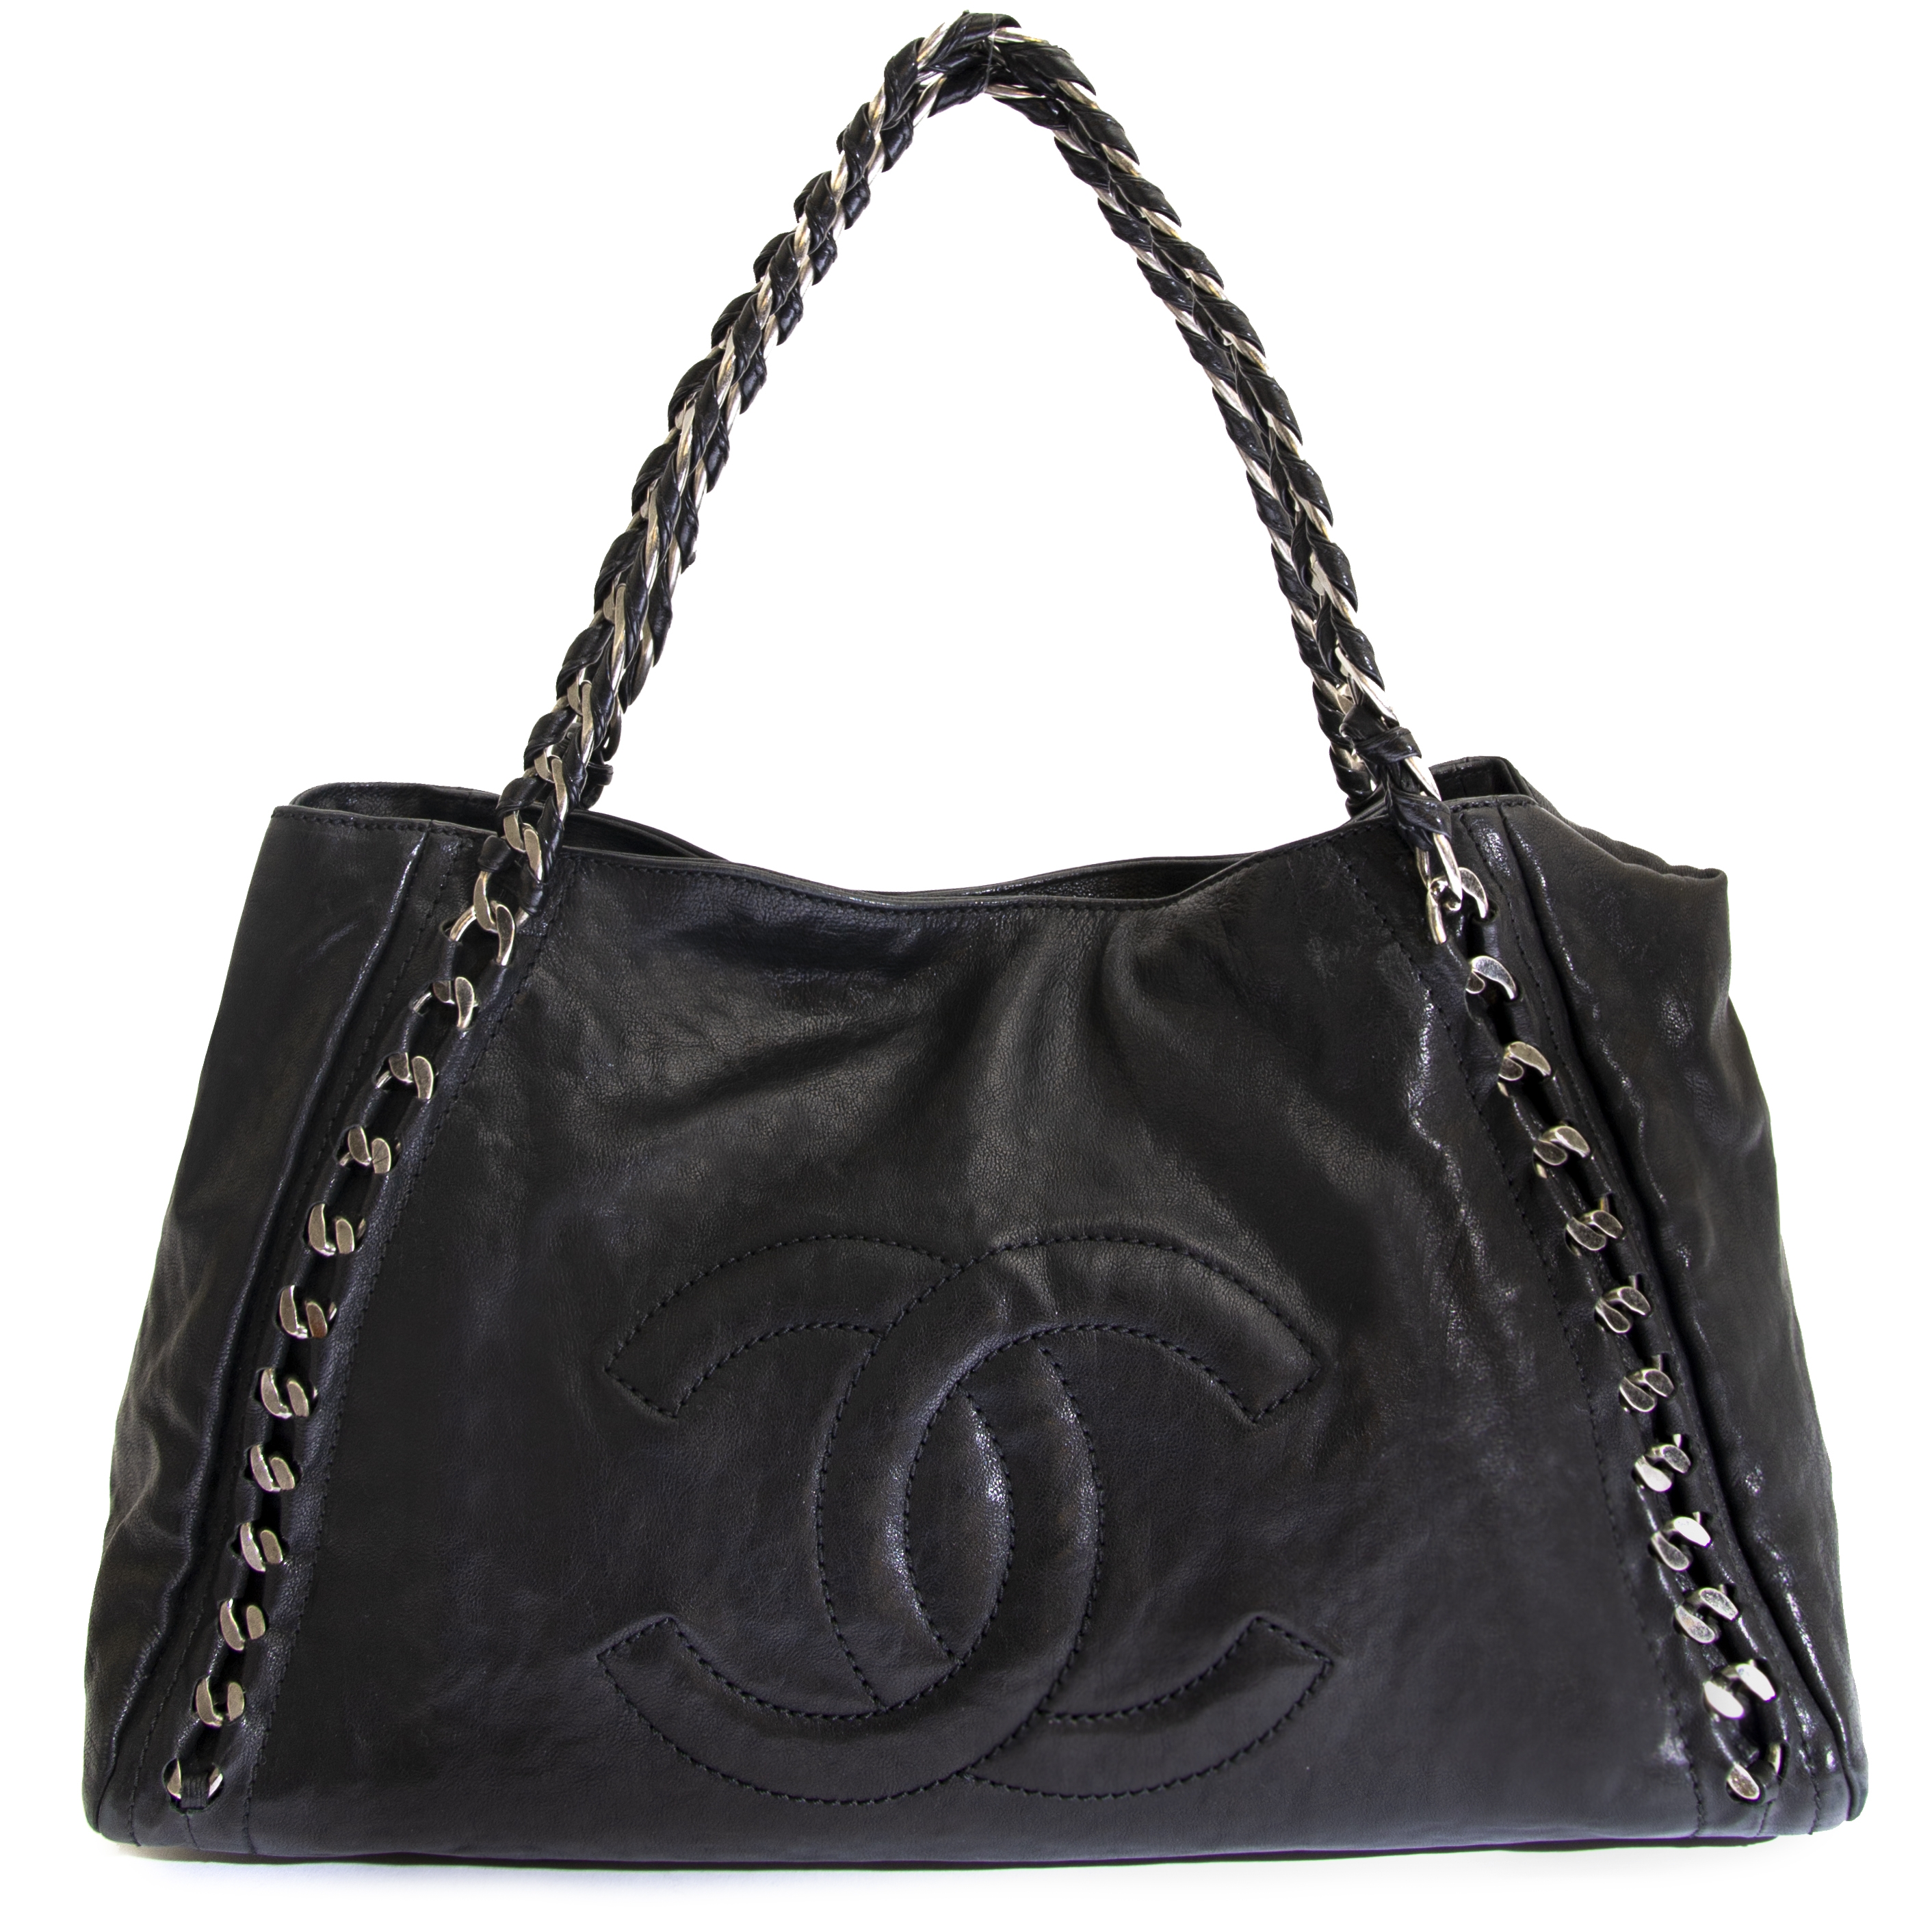 Buy, Sell and Consign Authentic Designer Handbags and Accessories